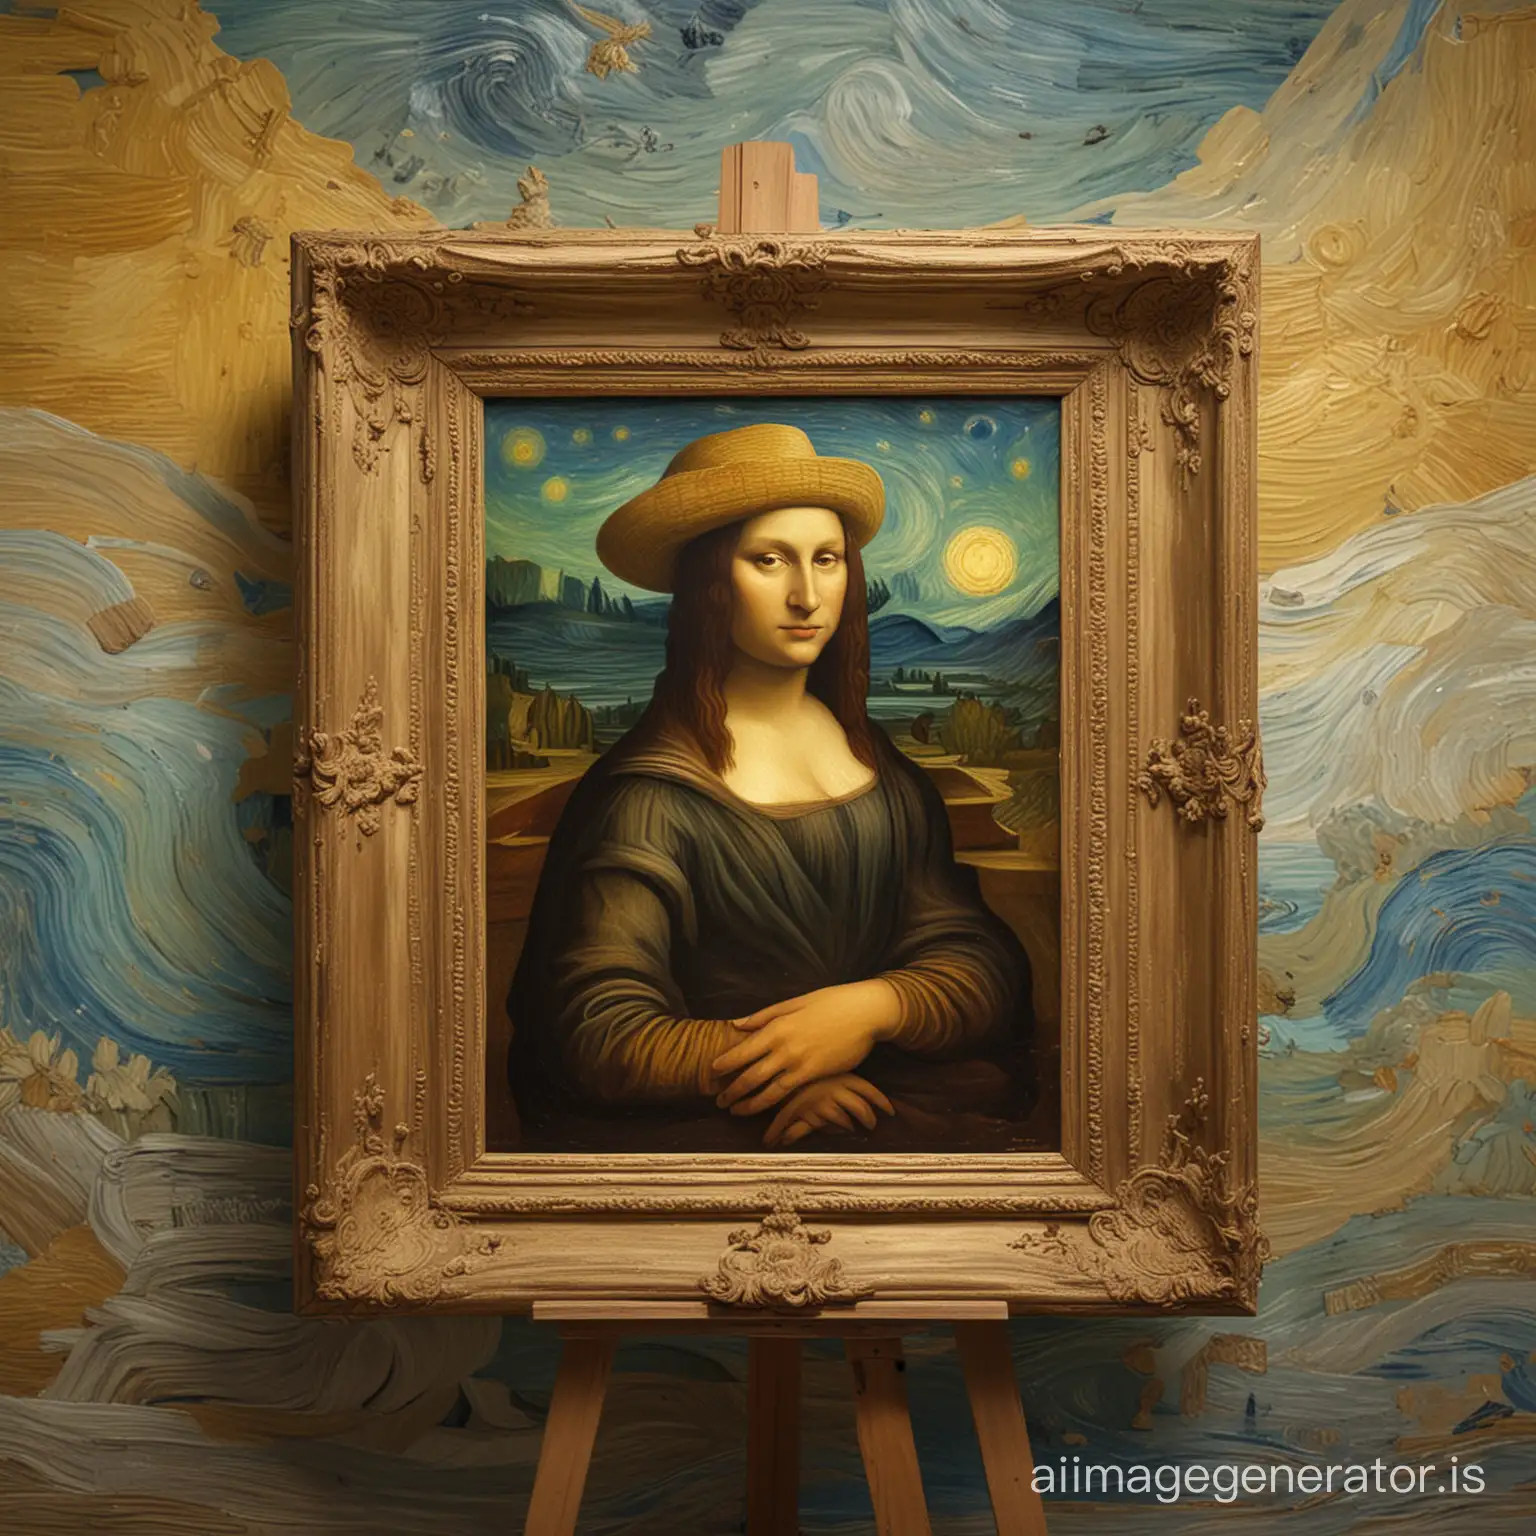 A surreal and imaginative scene where the enigmatic Mona Lisa, with a gentle smile, is painting a portrait of the famed artist Vincent van Gogh. Van Gogh, wearing his iconic hat and brush in hand, sits patiently as if posing for his own masterpiece. The backdrop features swirling, dreamlike colors and shapes, reminiscent of van Gogh's stellar works. The atmosphere of this otherworldly moment fuses history and art, capturing the essence of creativity and artistic genius.sm